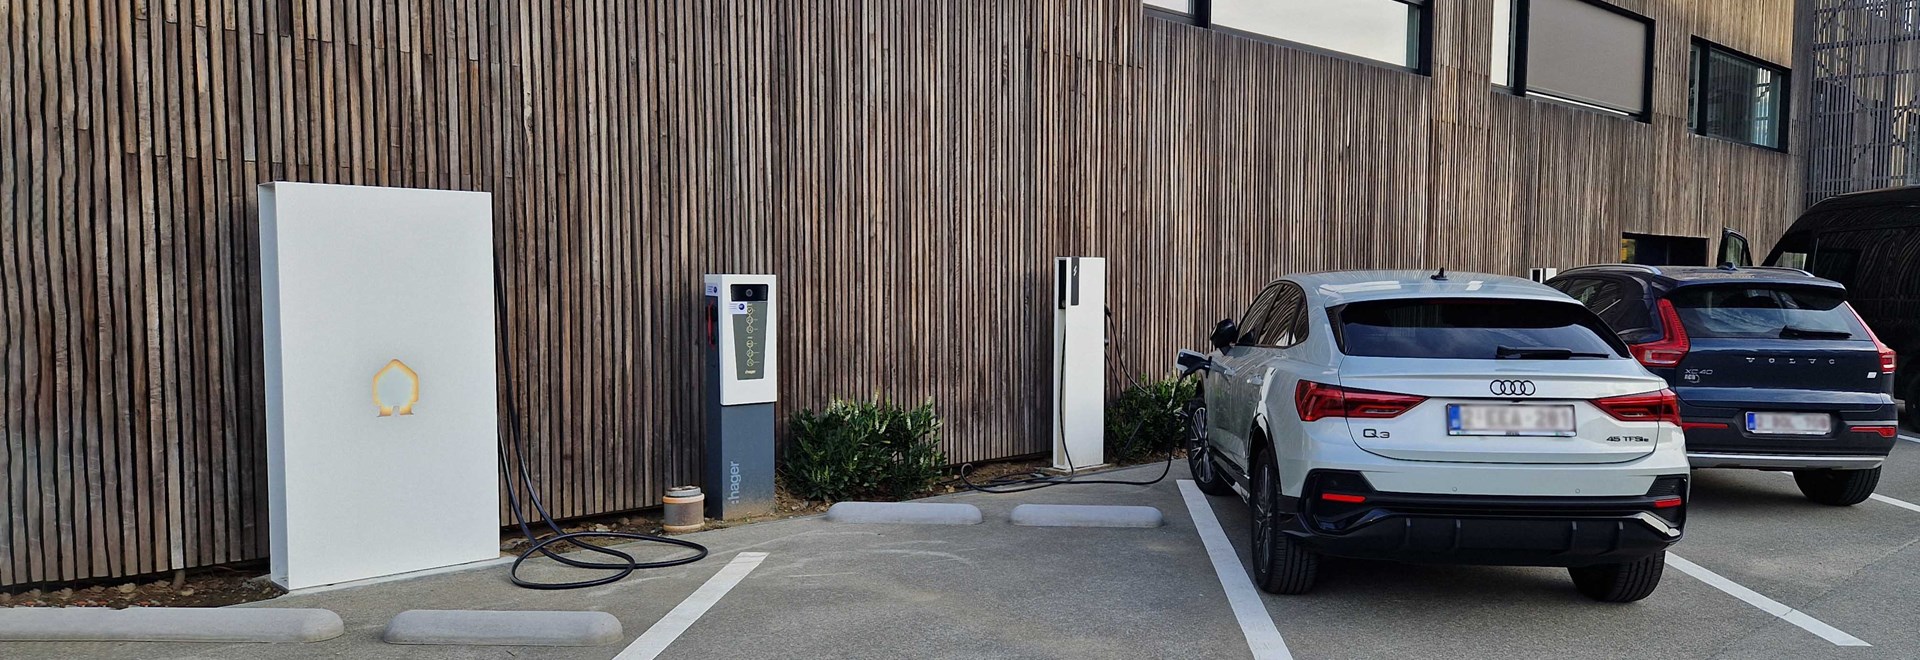 LCL's charging infrastructure for electric vehicles